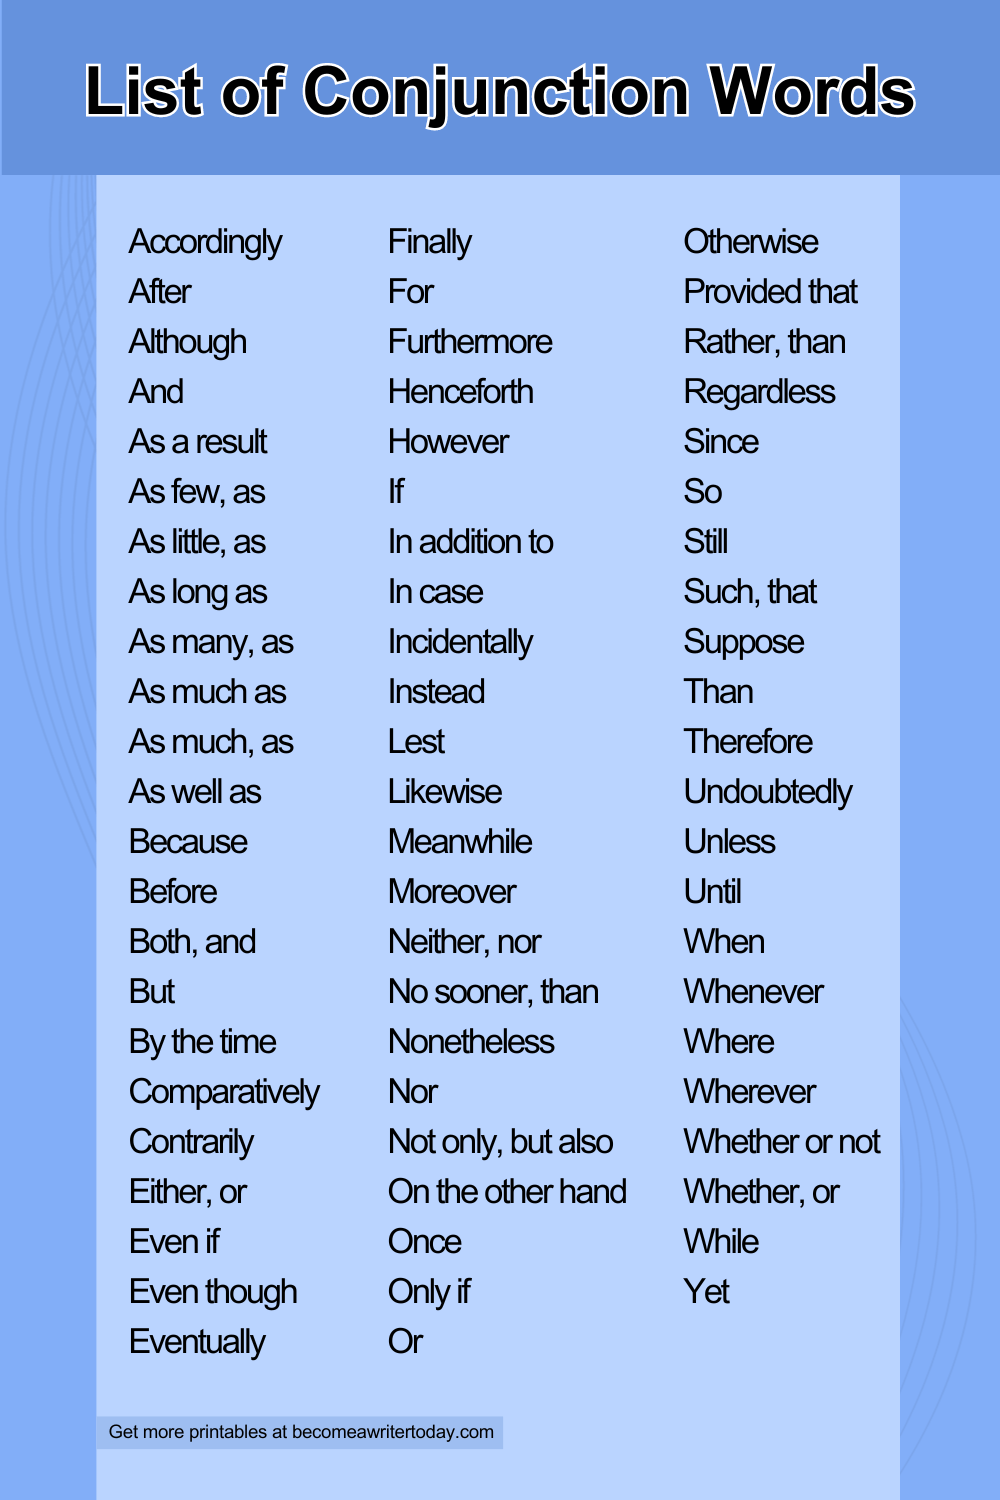 List of conjunction words